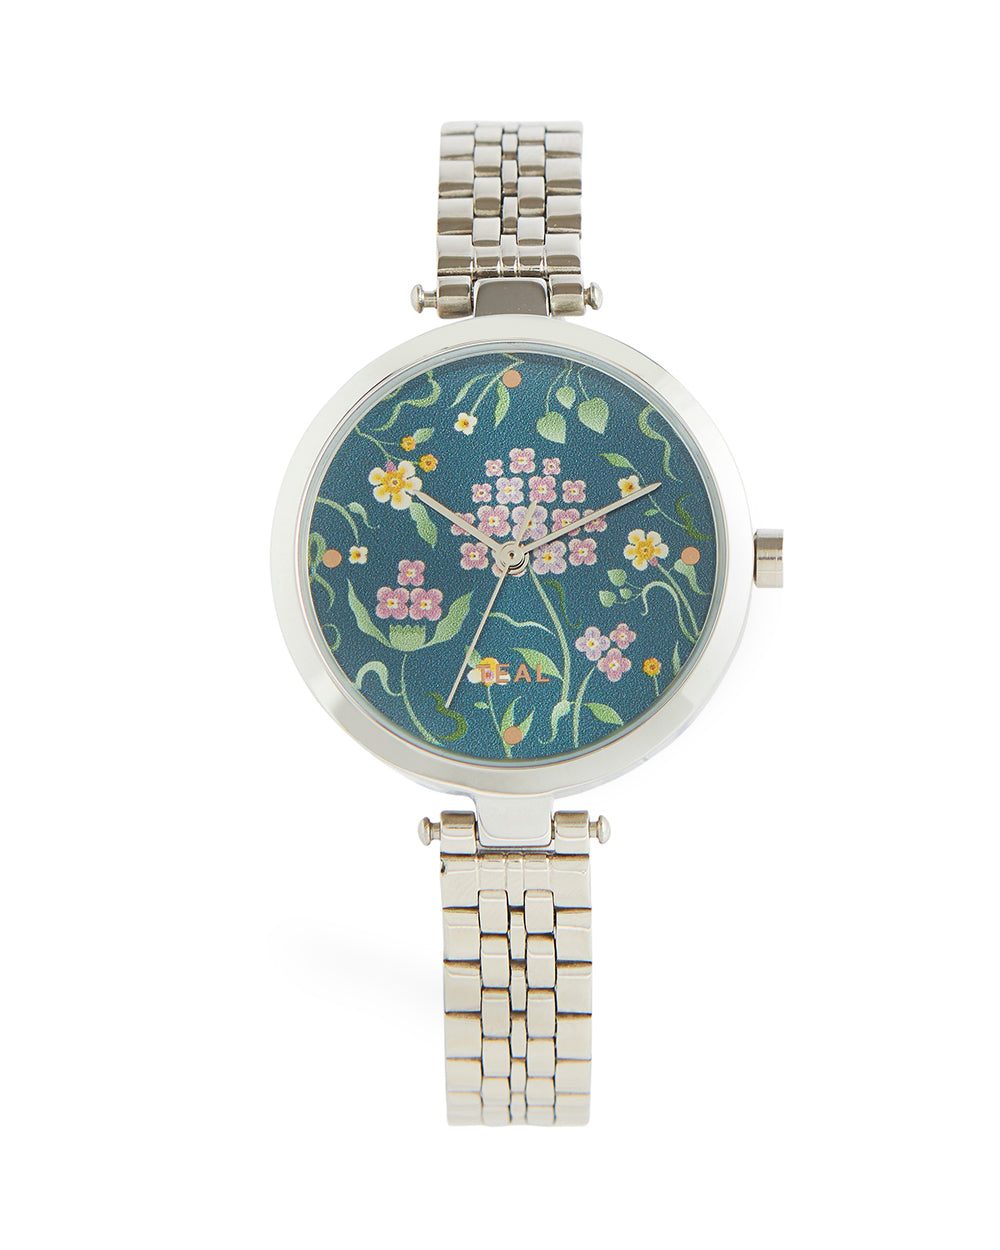 Teal by Chumbak Tropic Watch |Metal Link Strap - Navy